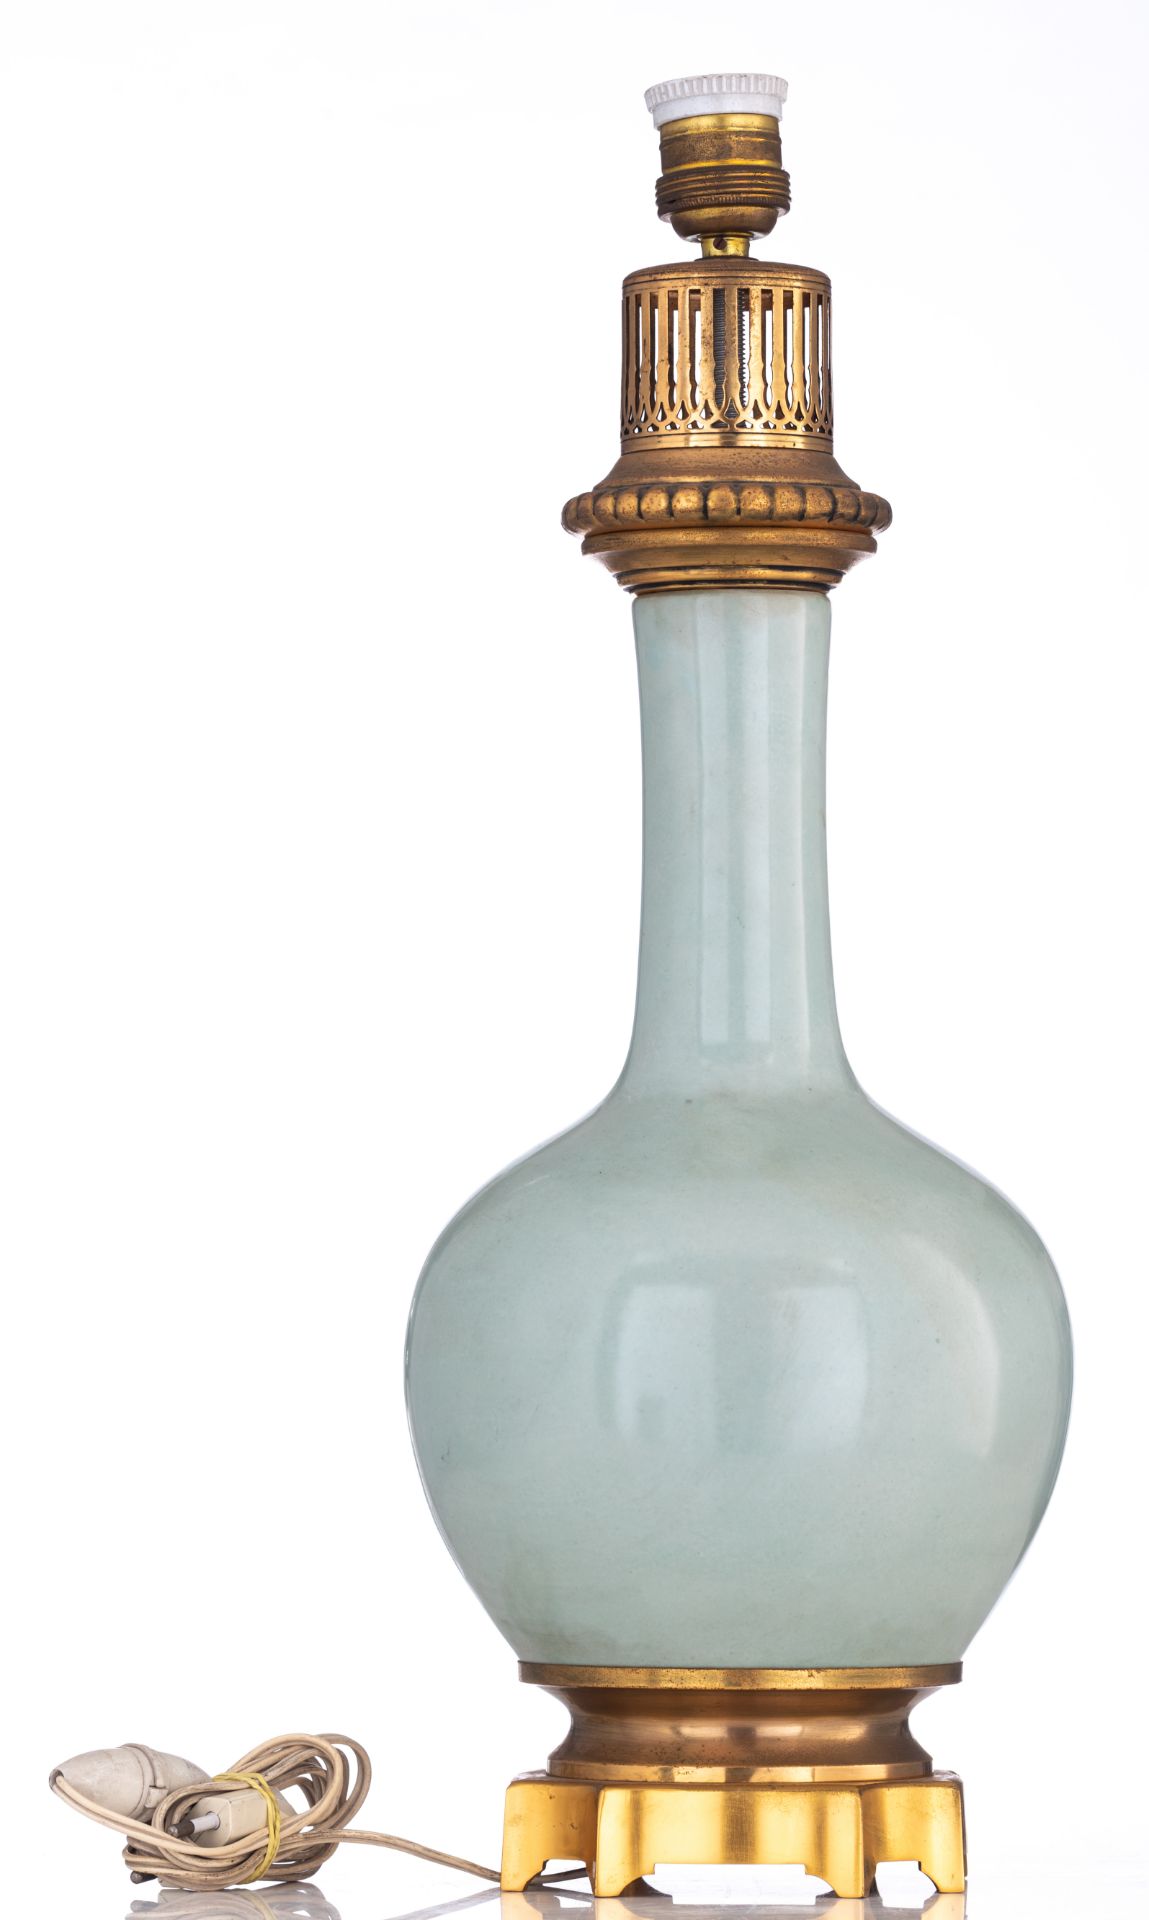 A copy of a Chinese celadon vase, mounted as a lamp, H 30 - 81 cm (the vase - the whole) - Image 5 of 9